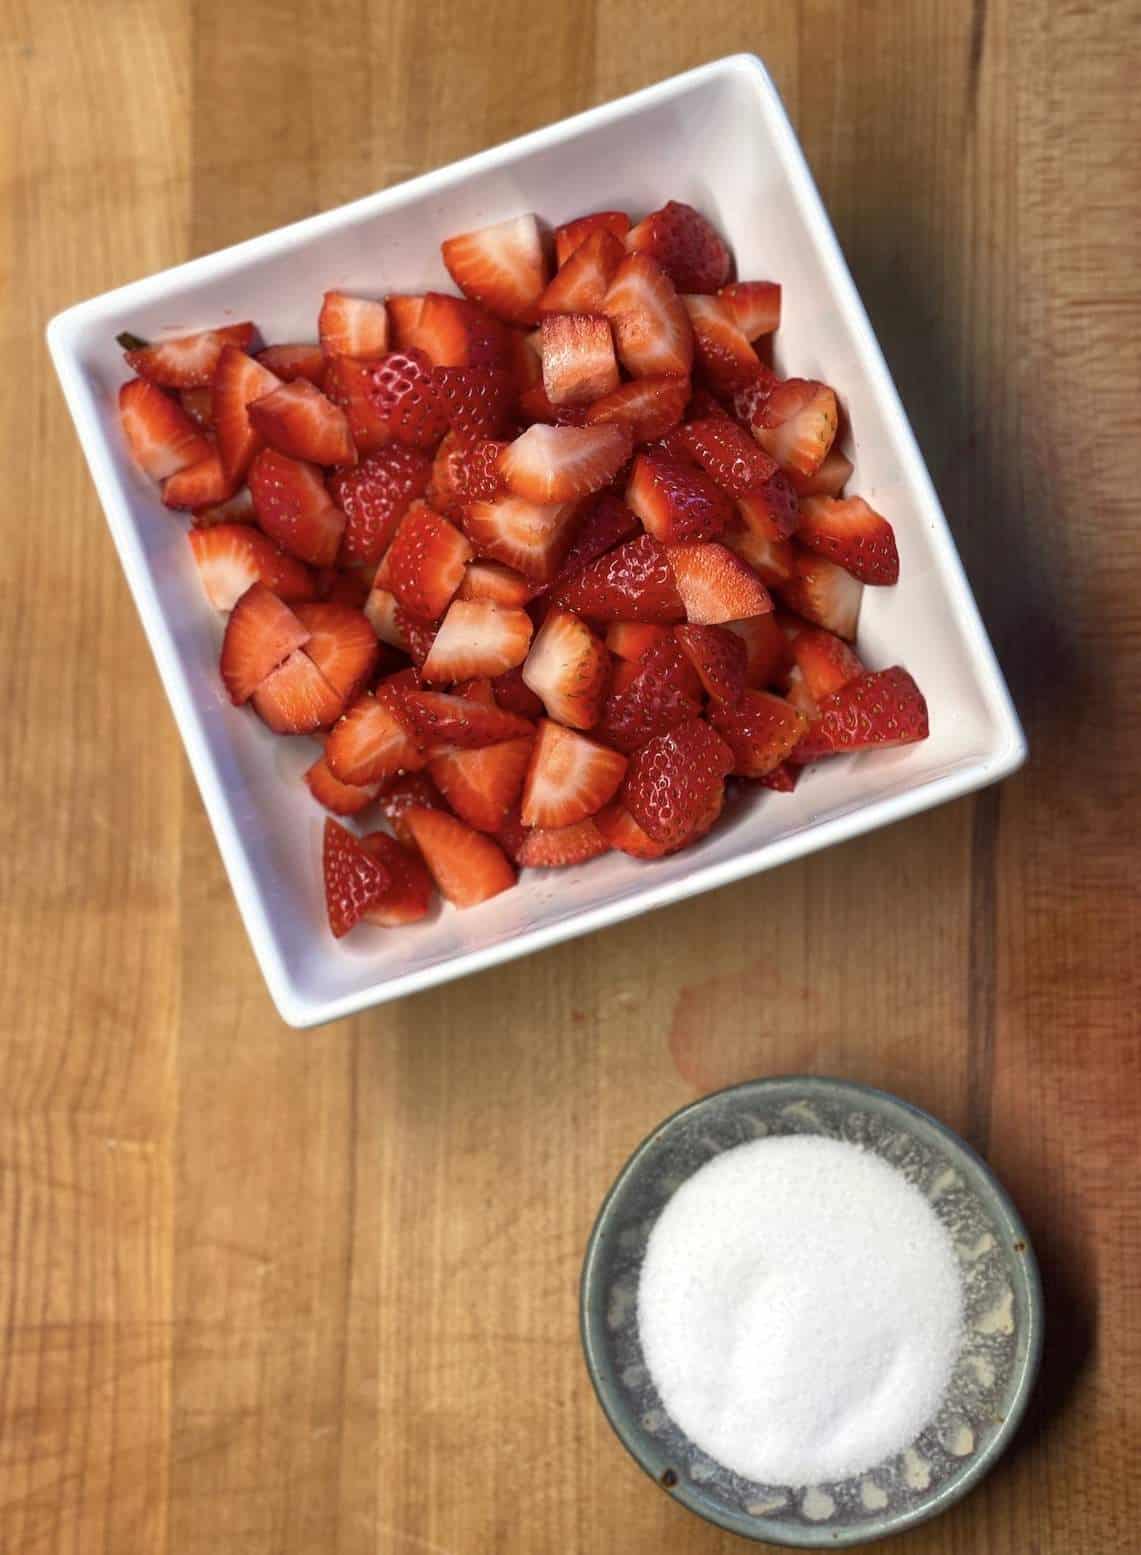 A bowl of strawberries and a bowl of sugar before being mixed together.